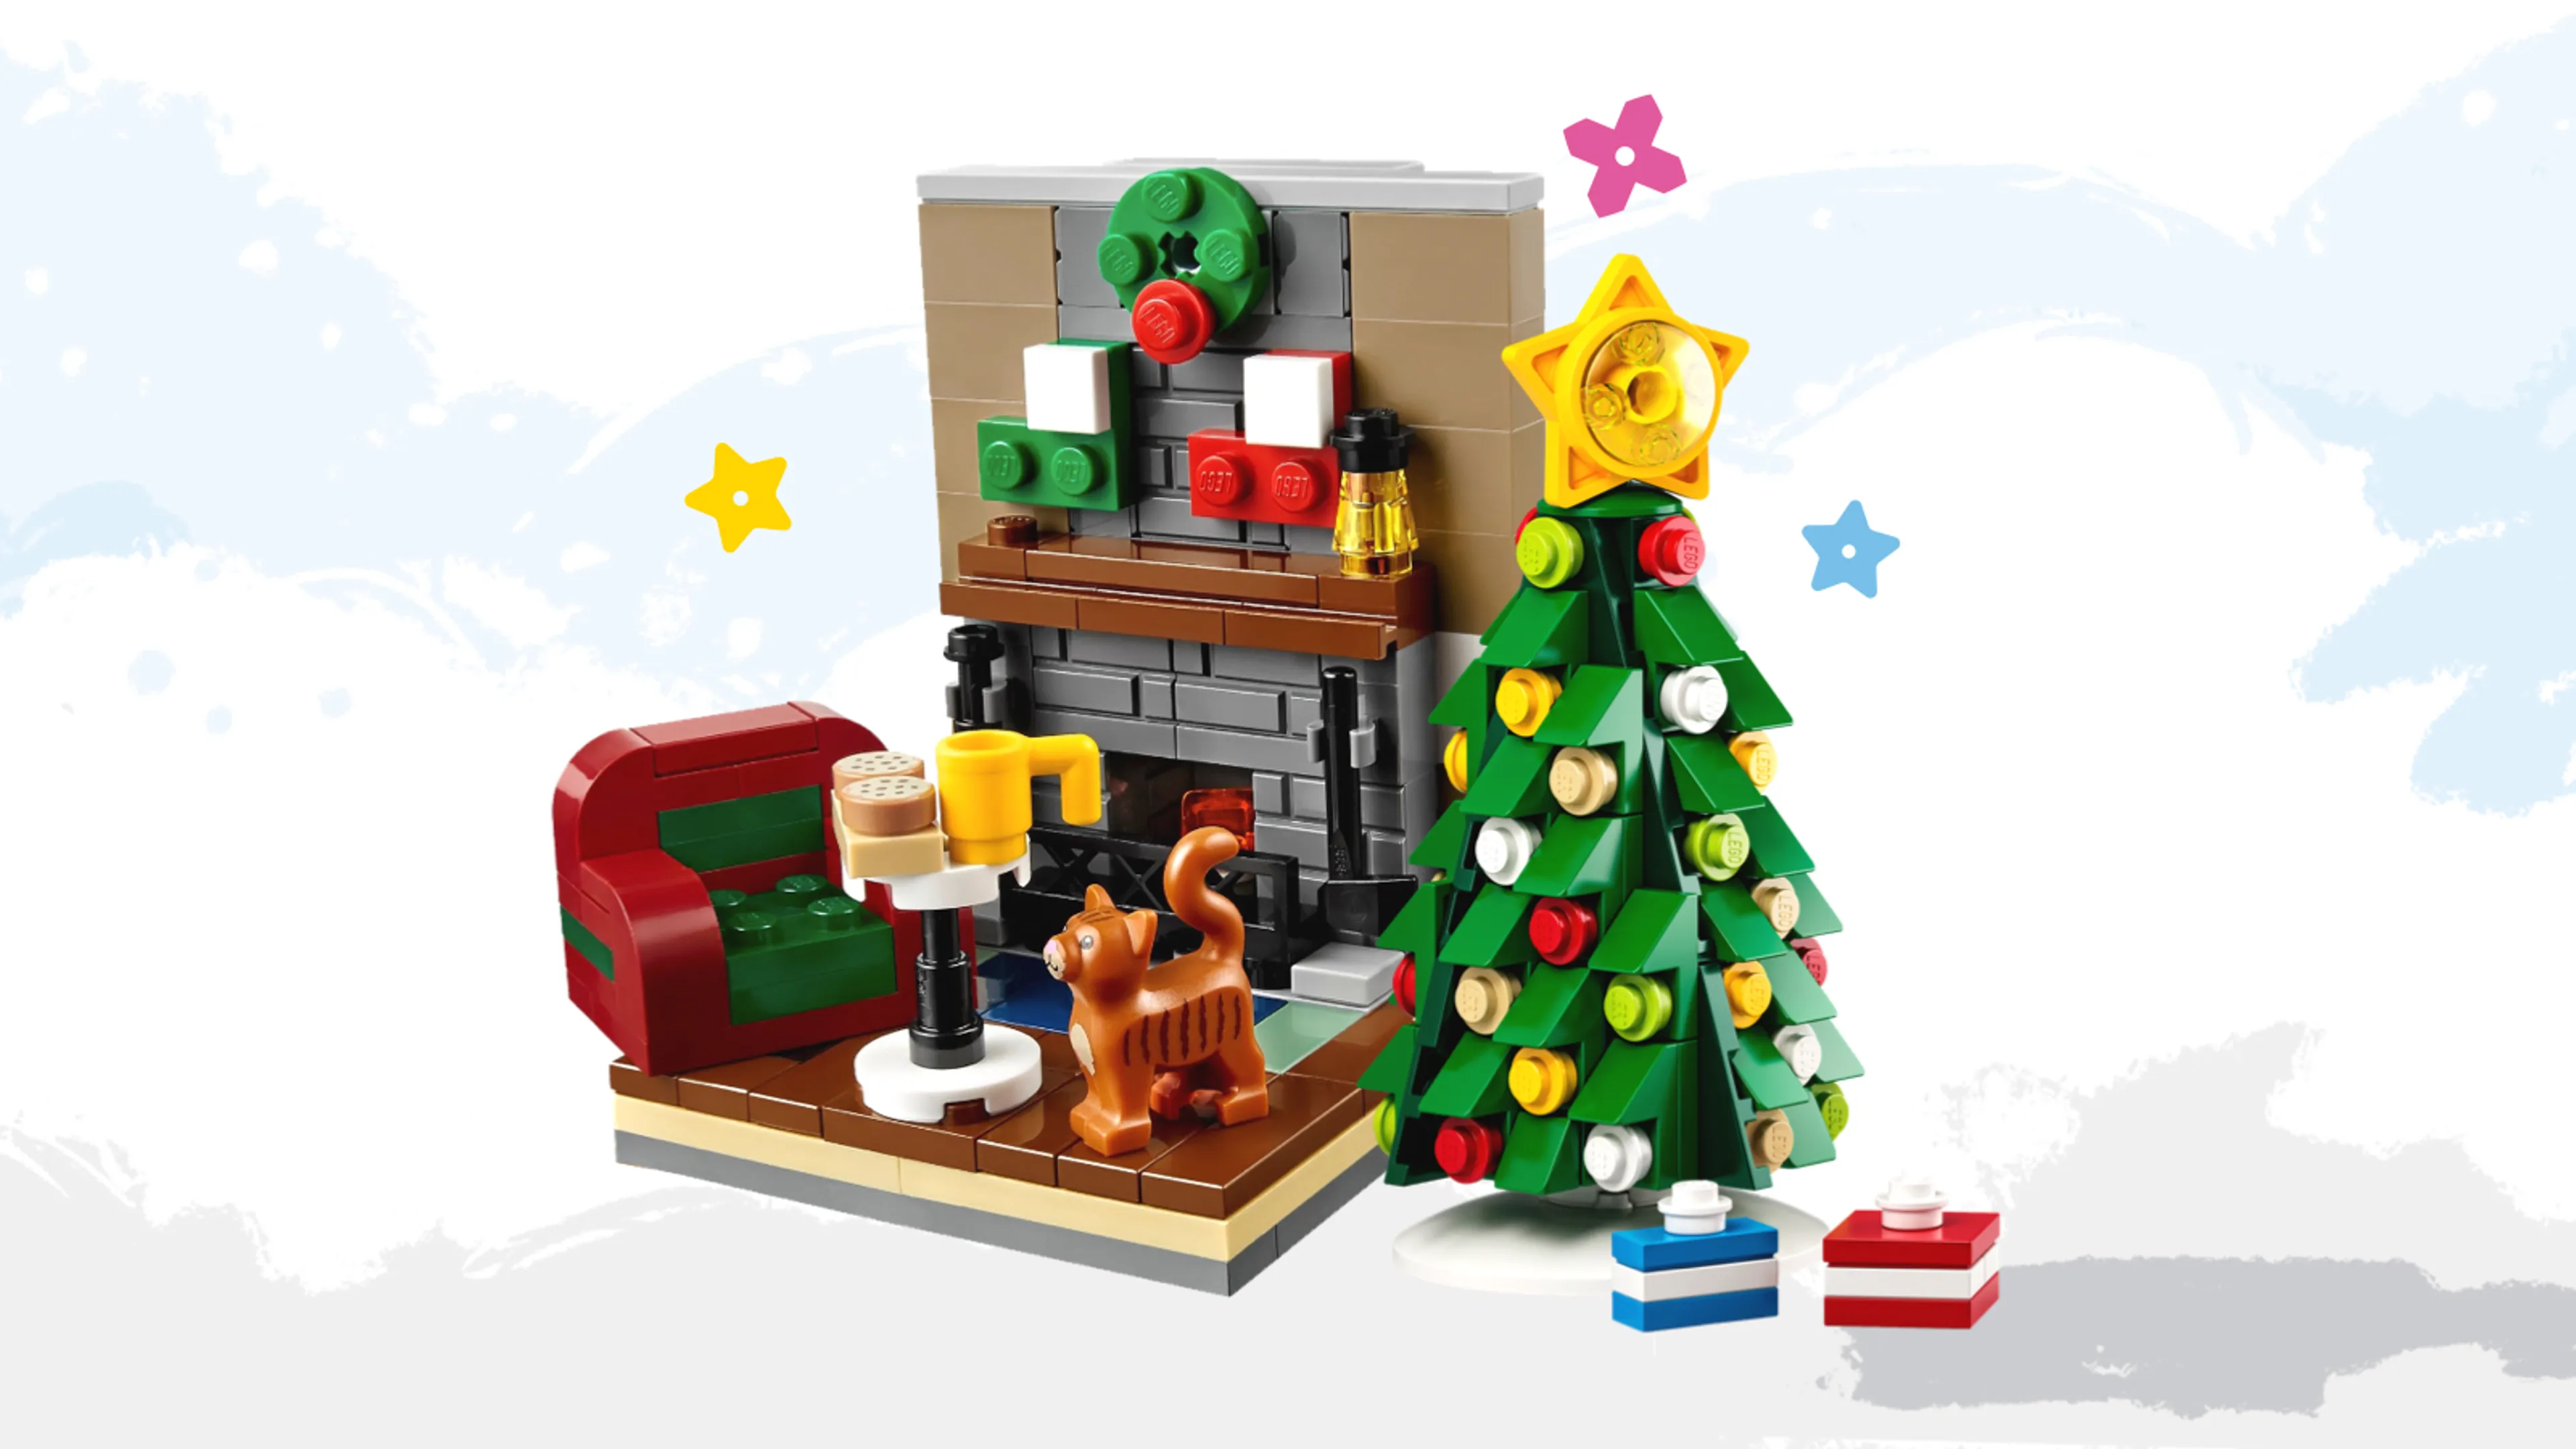 A cozy living room LEGO build featuring a fireplace and a holiday tree